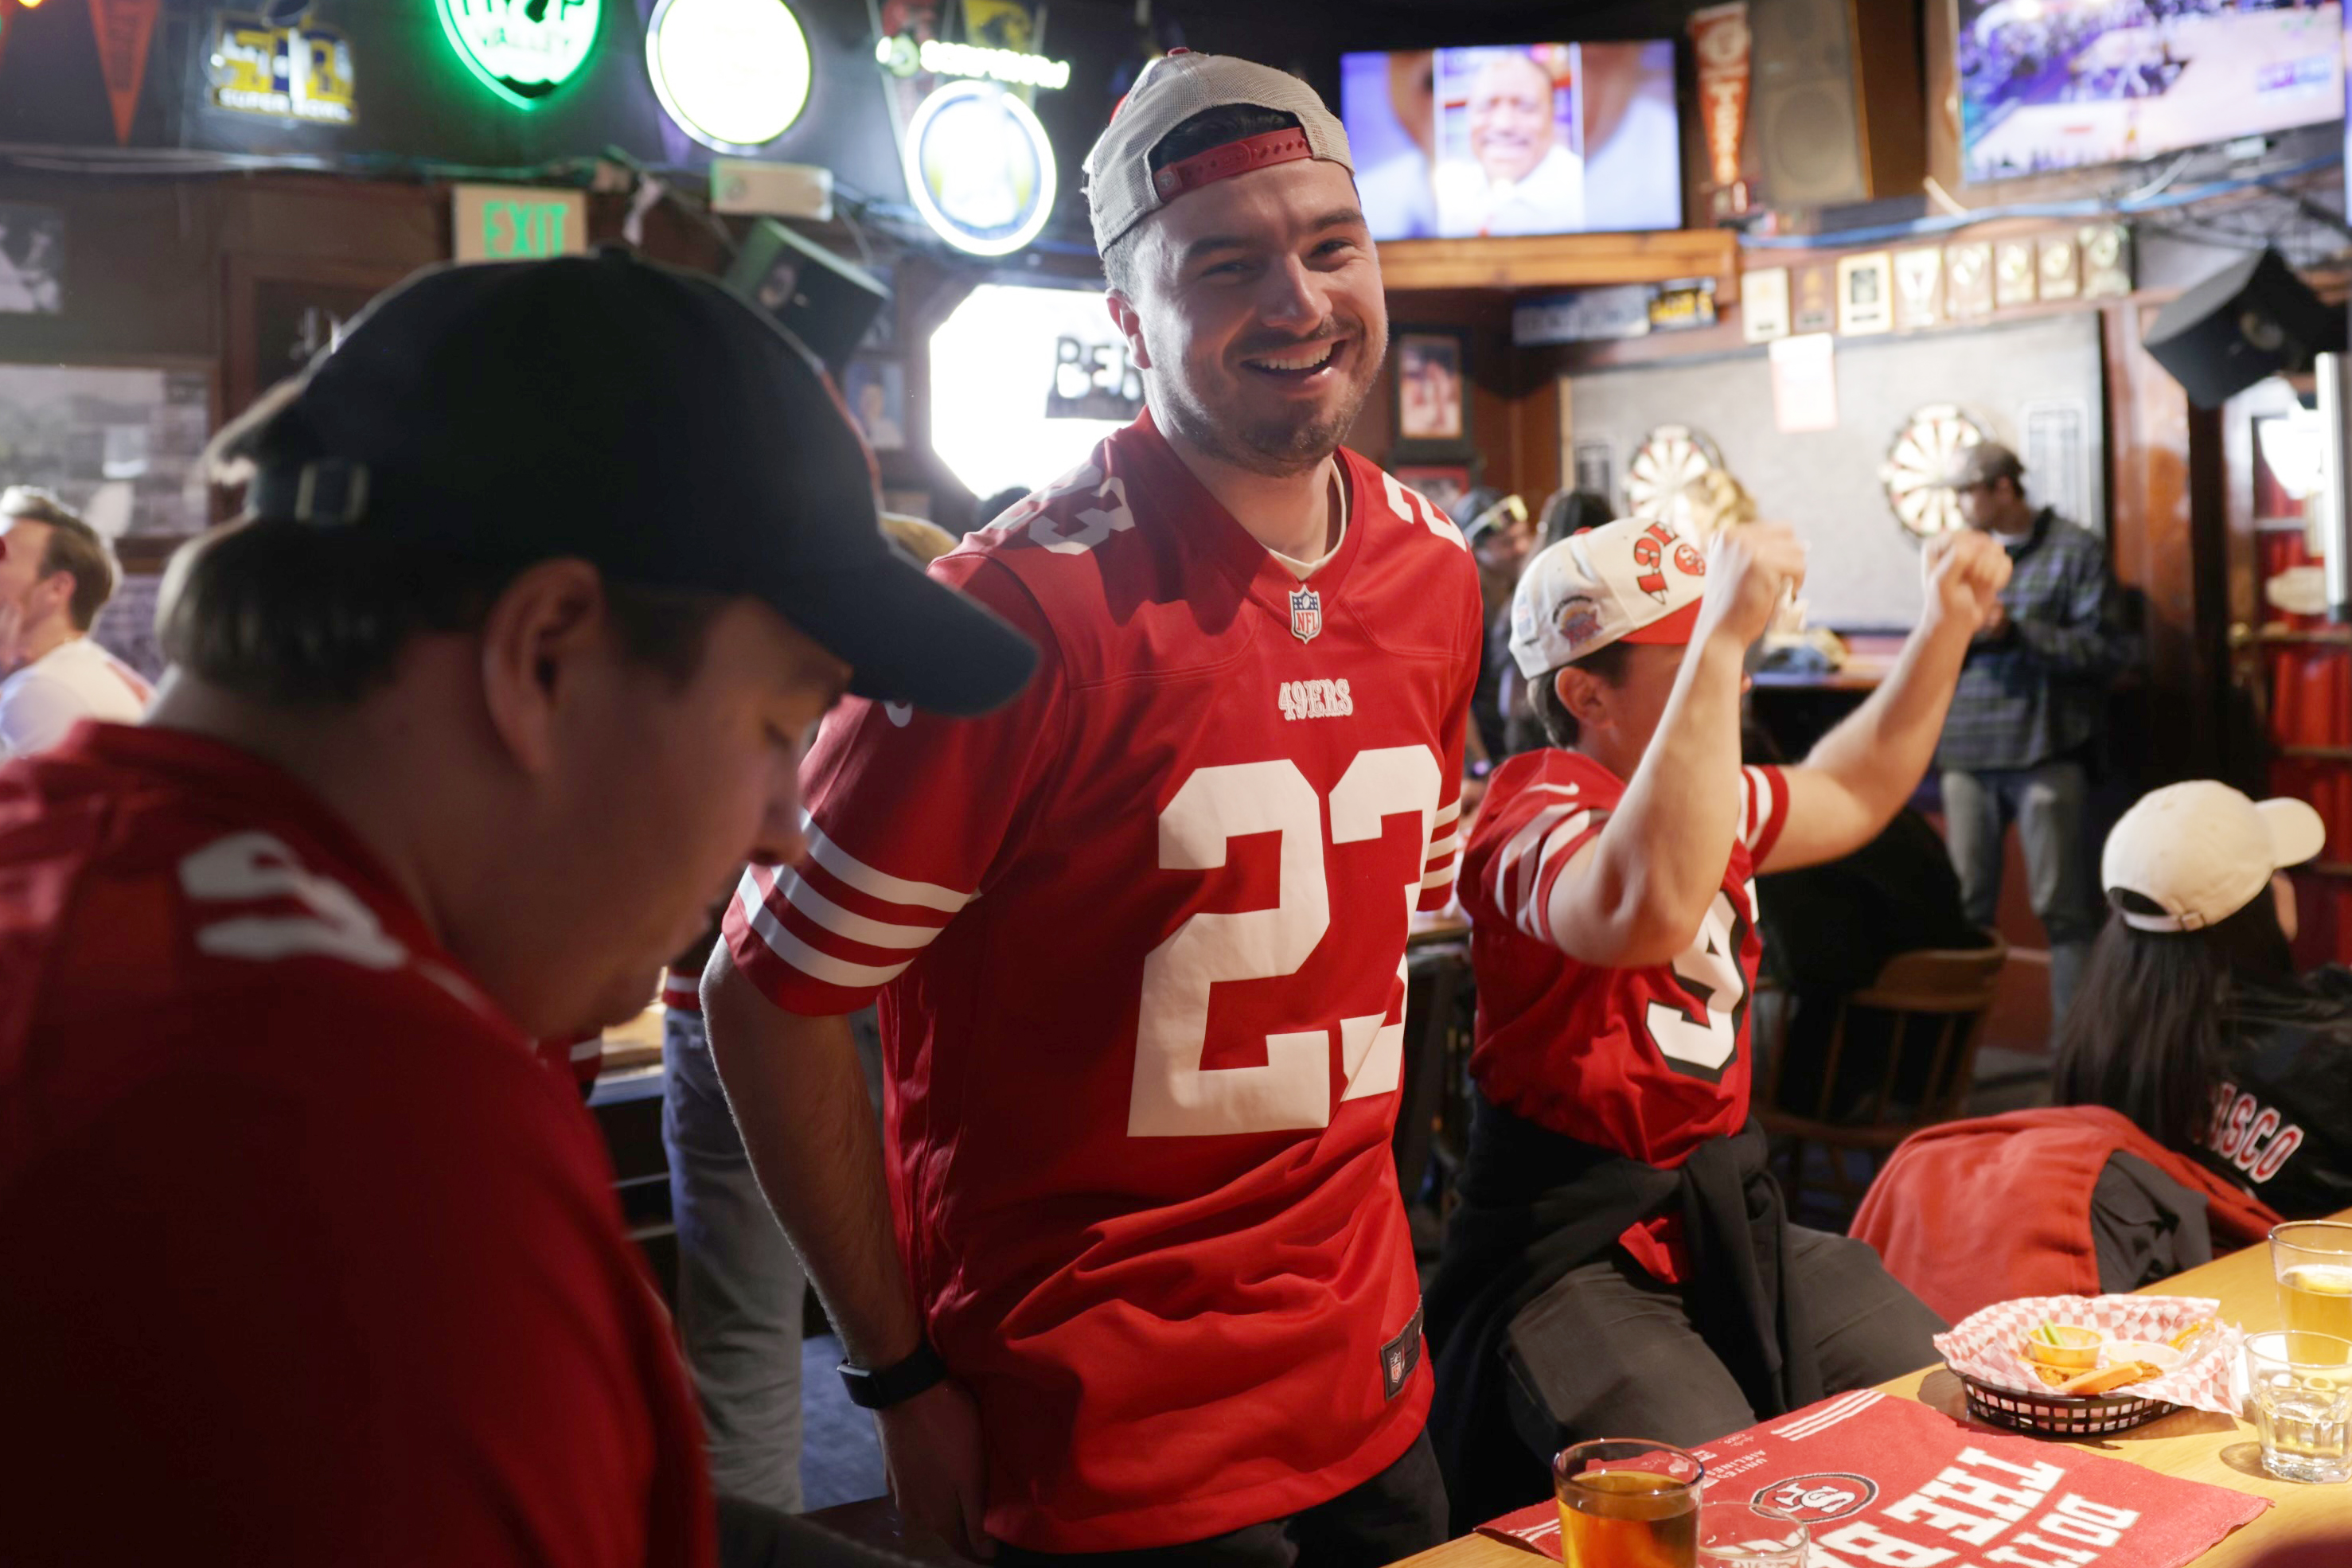 Man in 49ers jersey smiles inside bar as another man cheers behind him